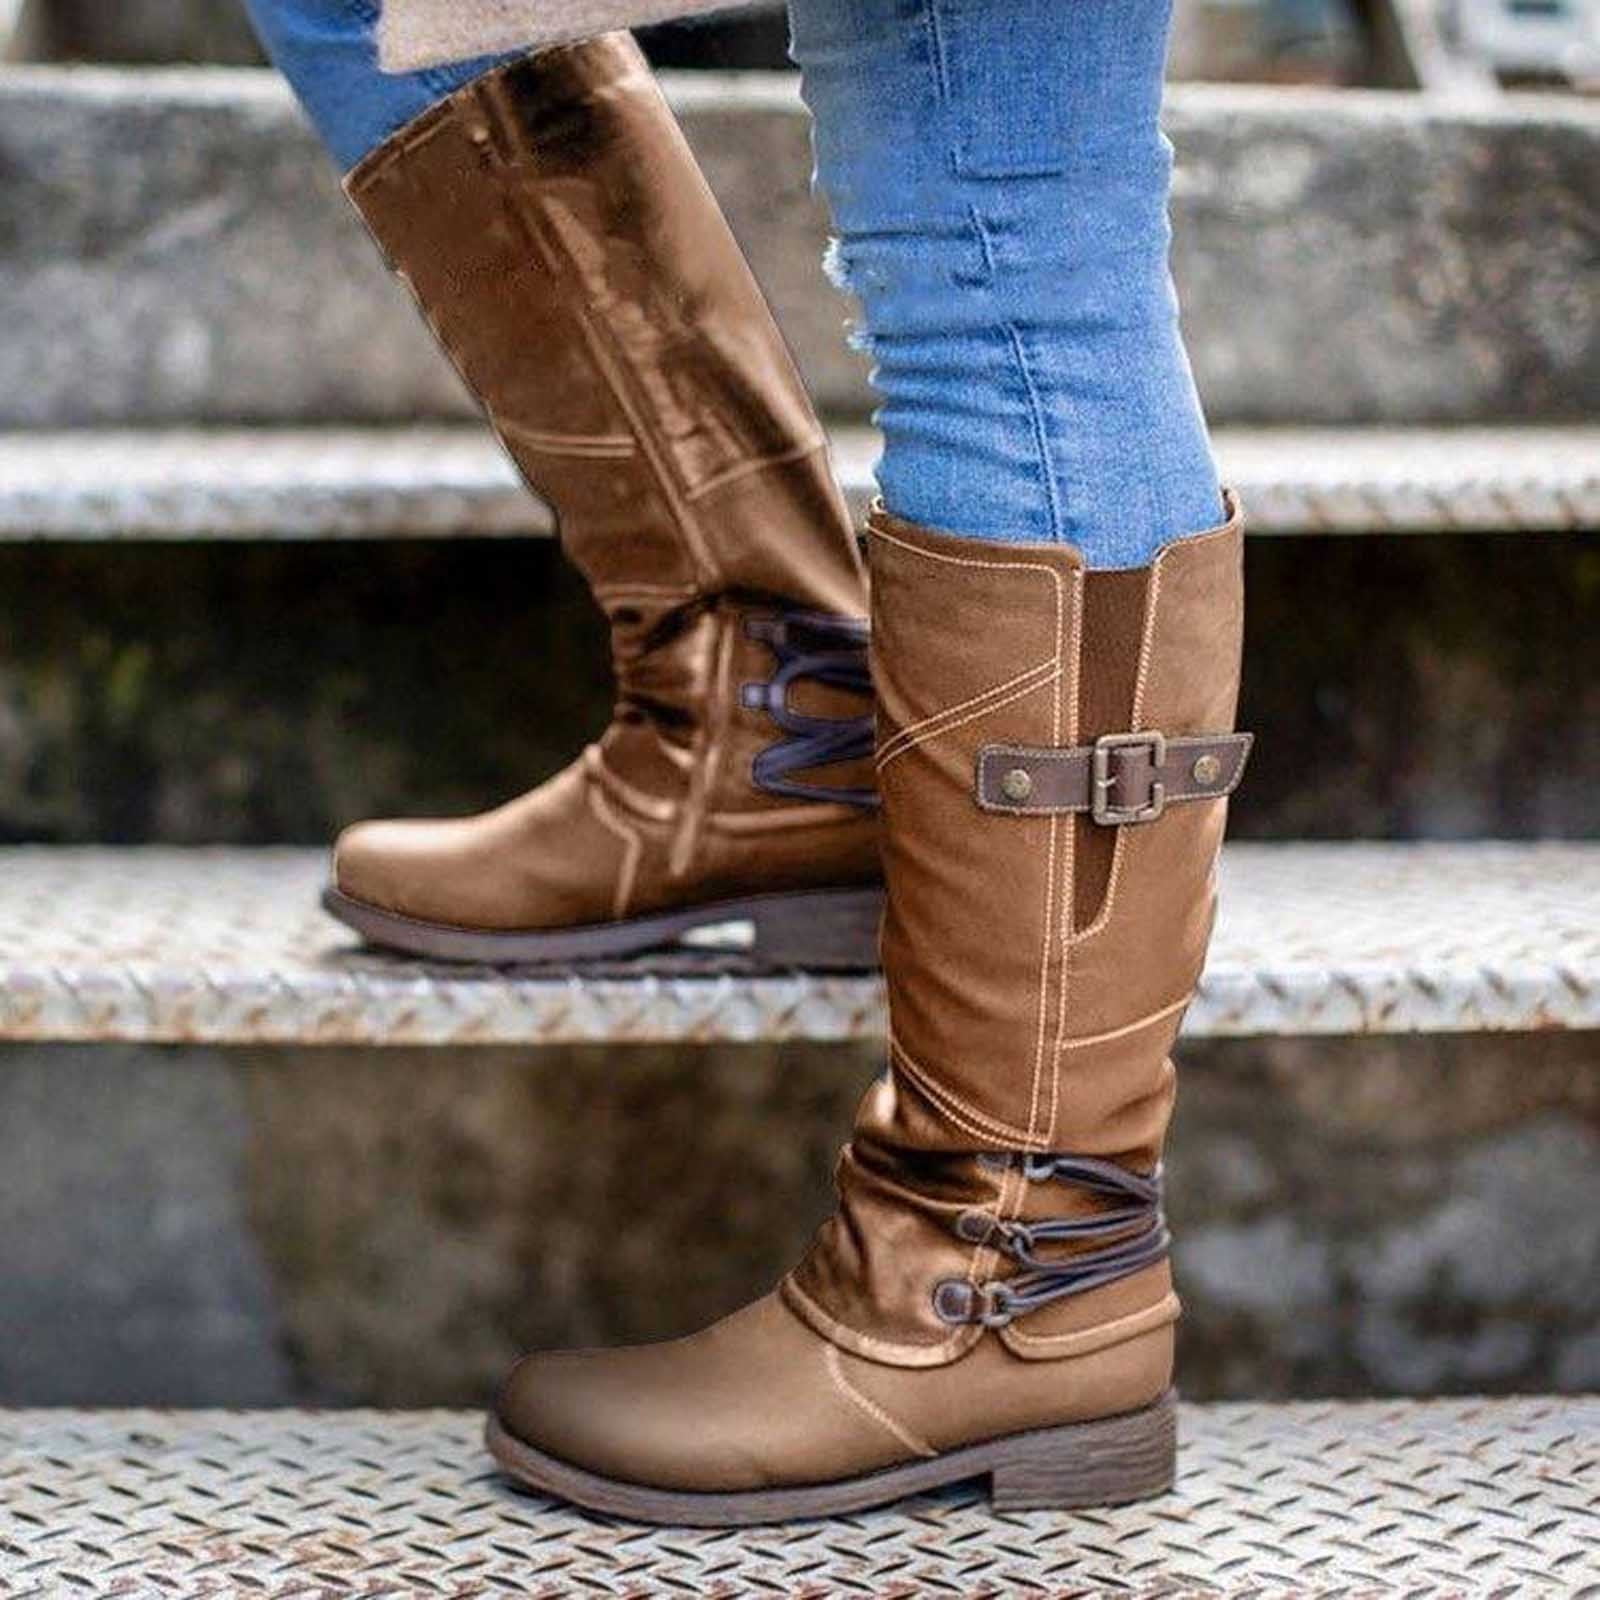 Instituut Masaccio Ver weg S LUKKC LUKKC Valentine's Day Gifts! Knee High Boots for Women, Low Block  Chunky Heel Riding Boots with Buckle Round Toe Side Zipper Flat Booties  Fall Winter Casual Outdoor Comfort Shoes -